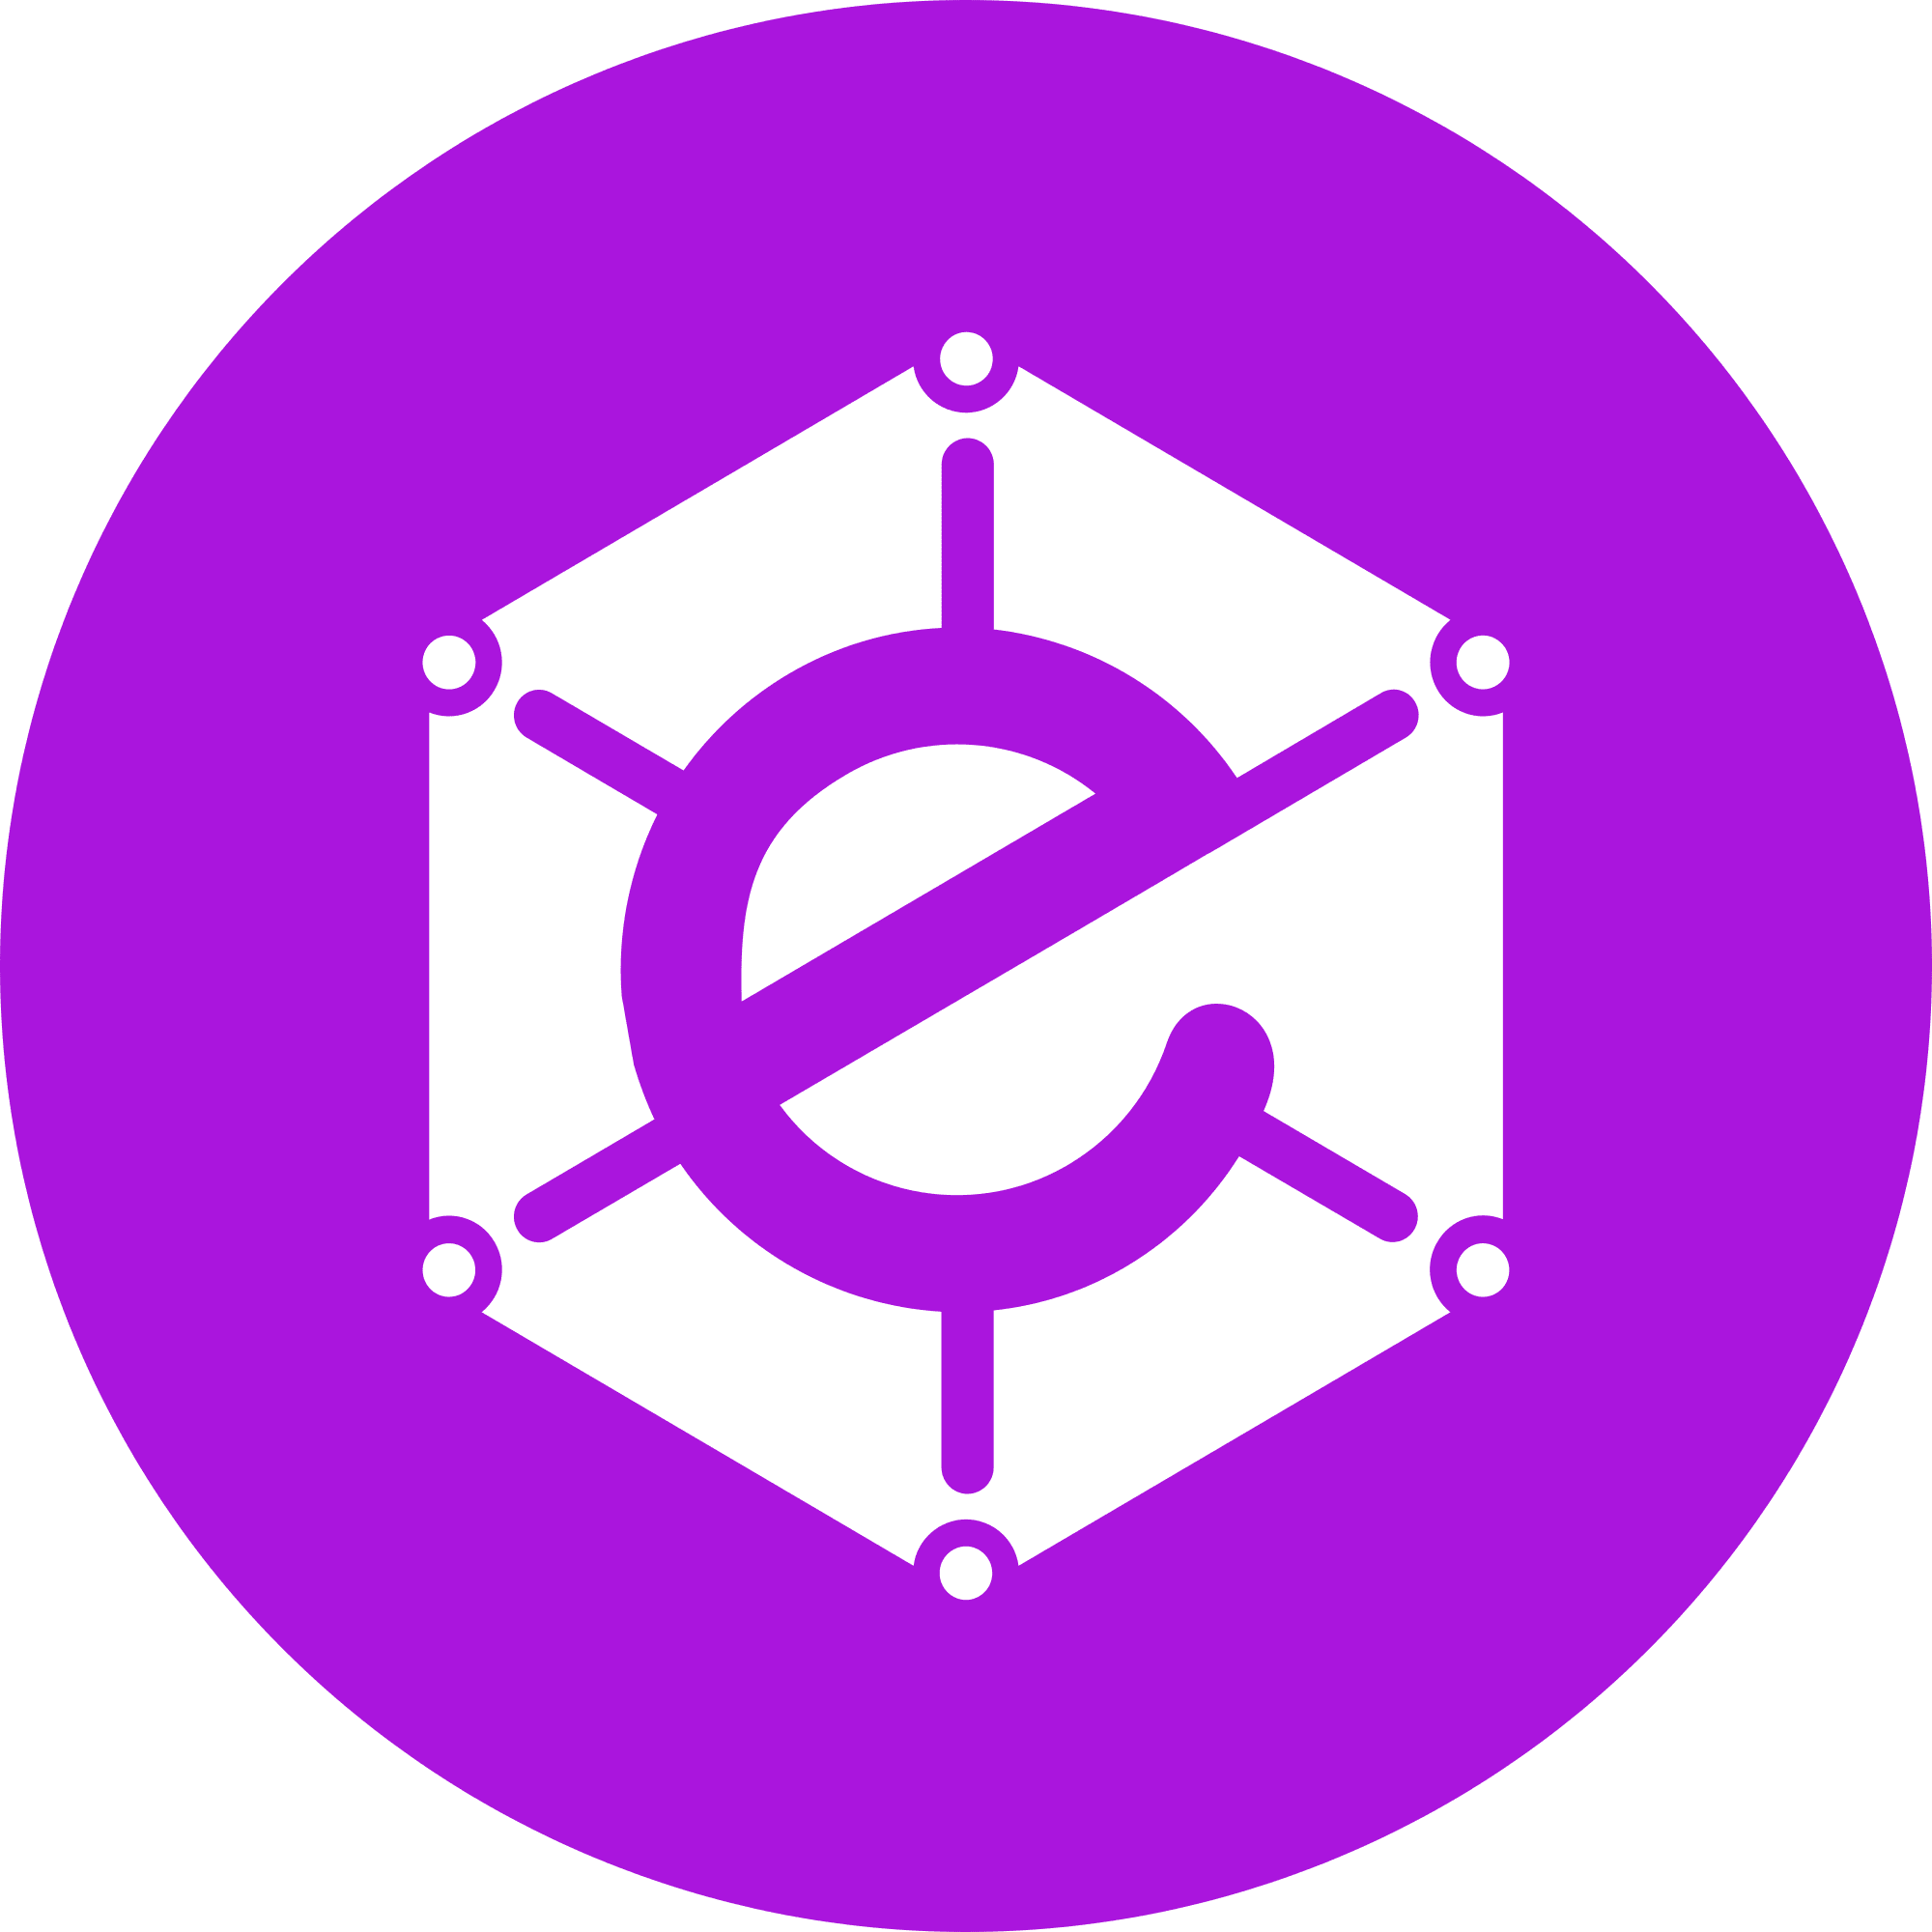 Electra logo in png format